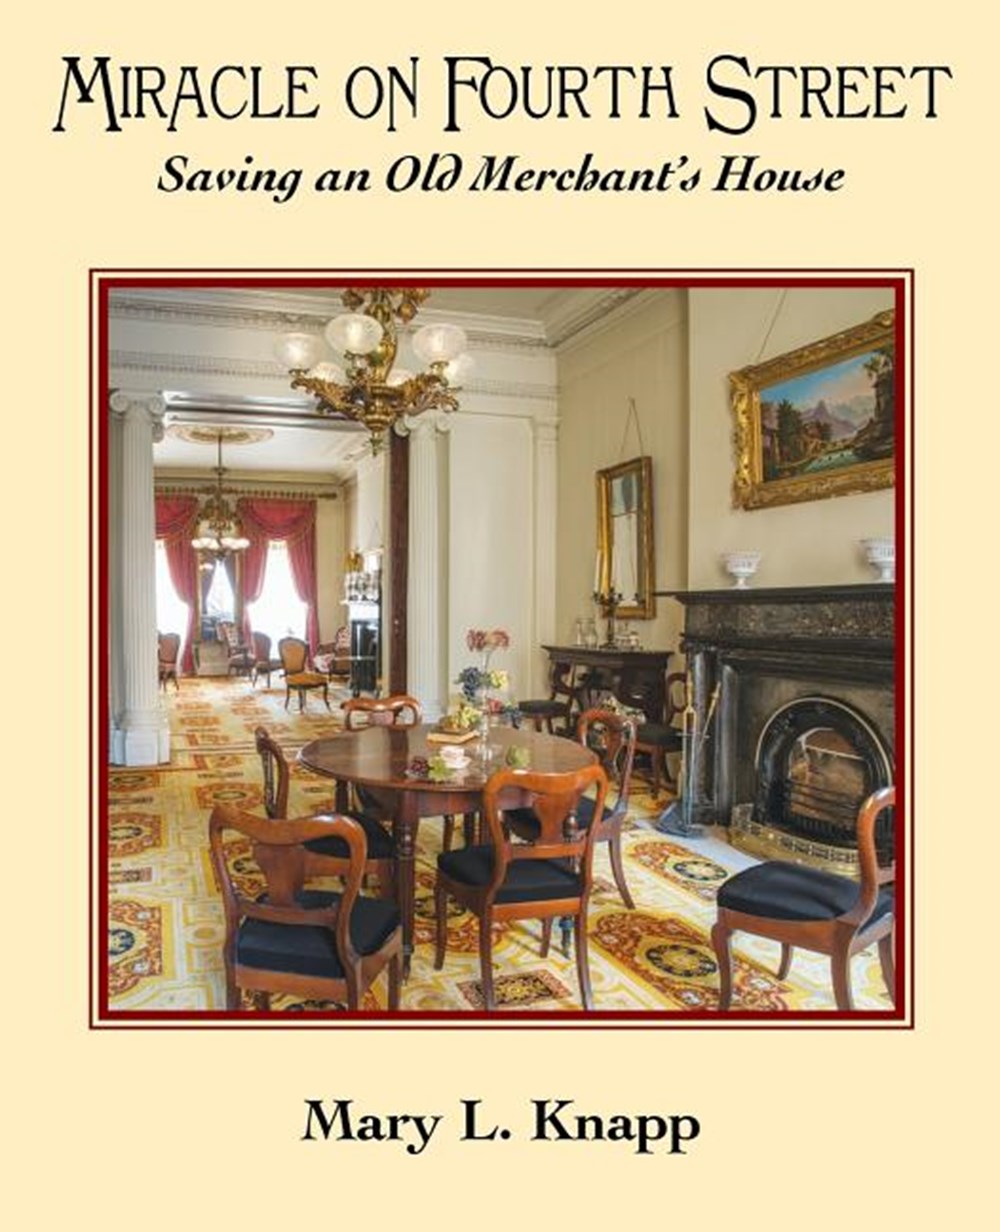 Miracle on Fourth Street: Saving an Old Merchant's House